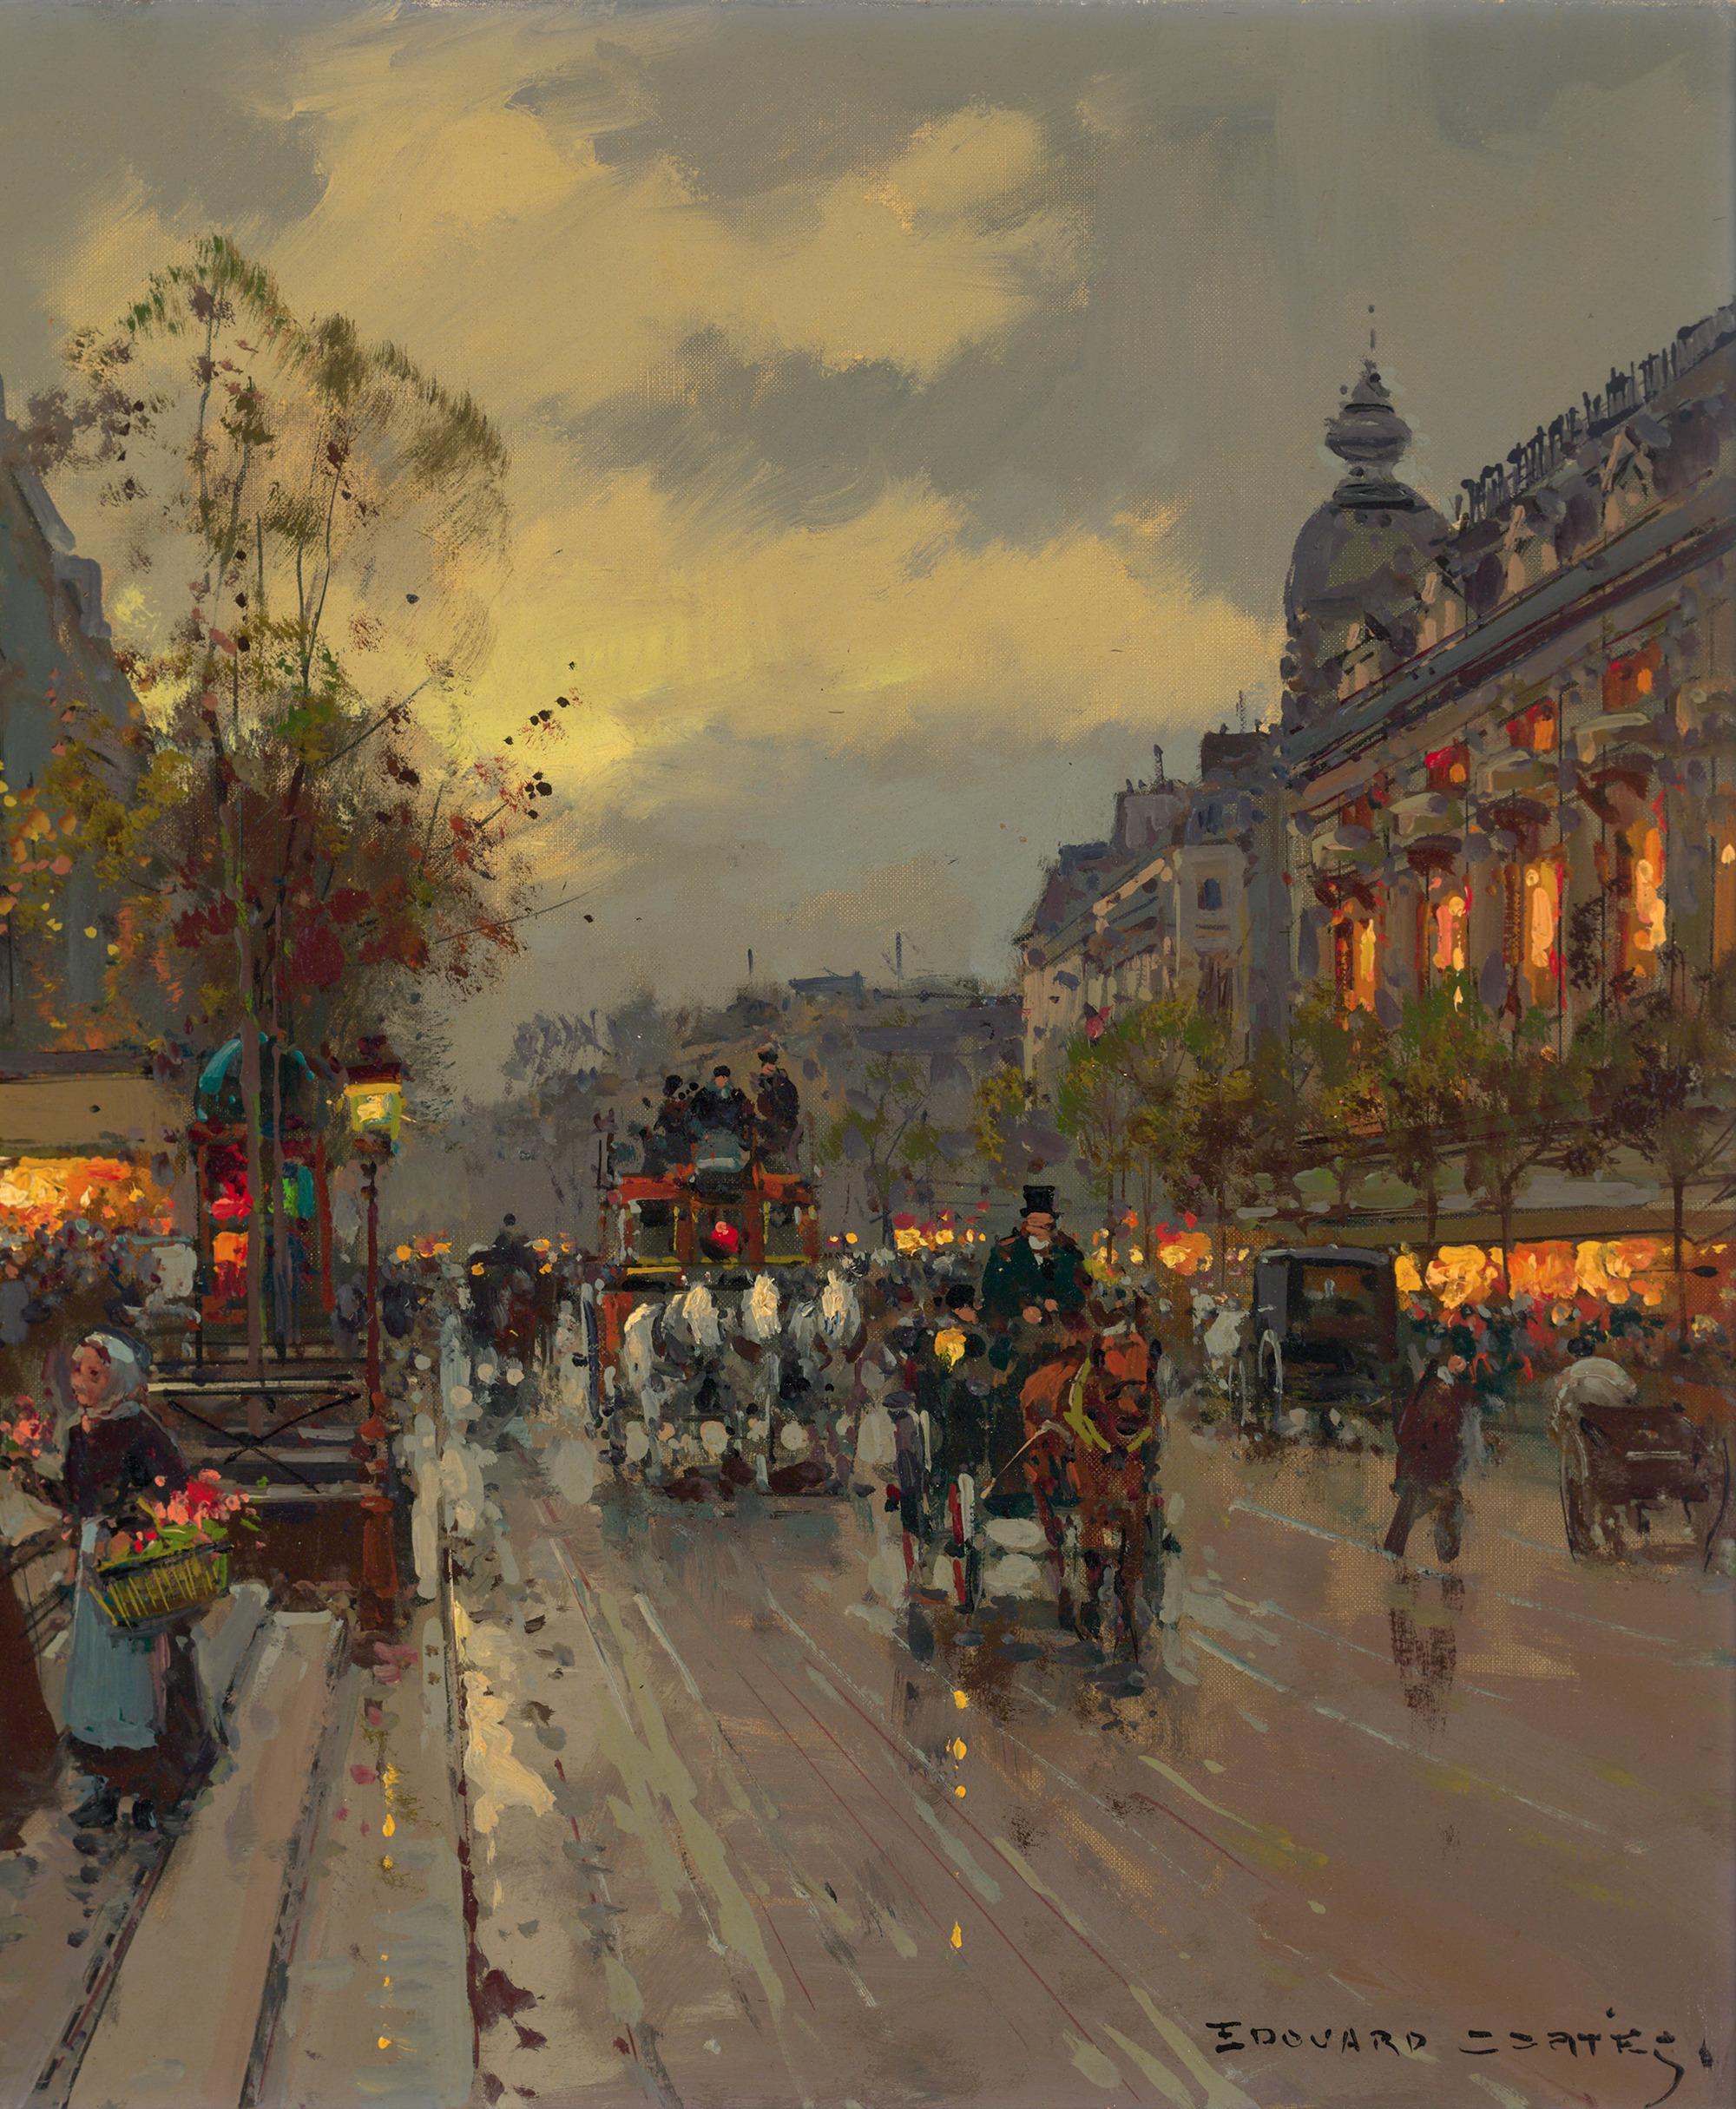 Edouard Léon Cortès
1882-1969  French

Boulevard Bonne Nouvelle

Signed “Edouard Cortès” (lower right)
Oil on canvas

French Post-Impressionist artist Edouard Léon Cortès captures one of the grand boulevards of Paris in this extraordinary oil on